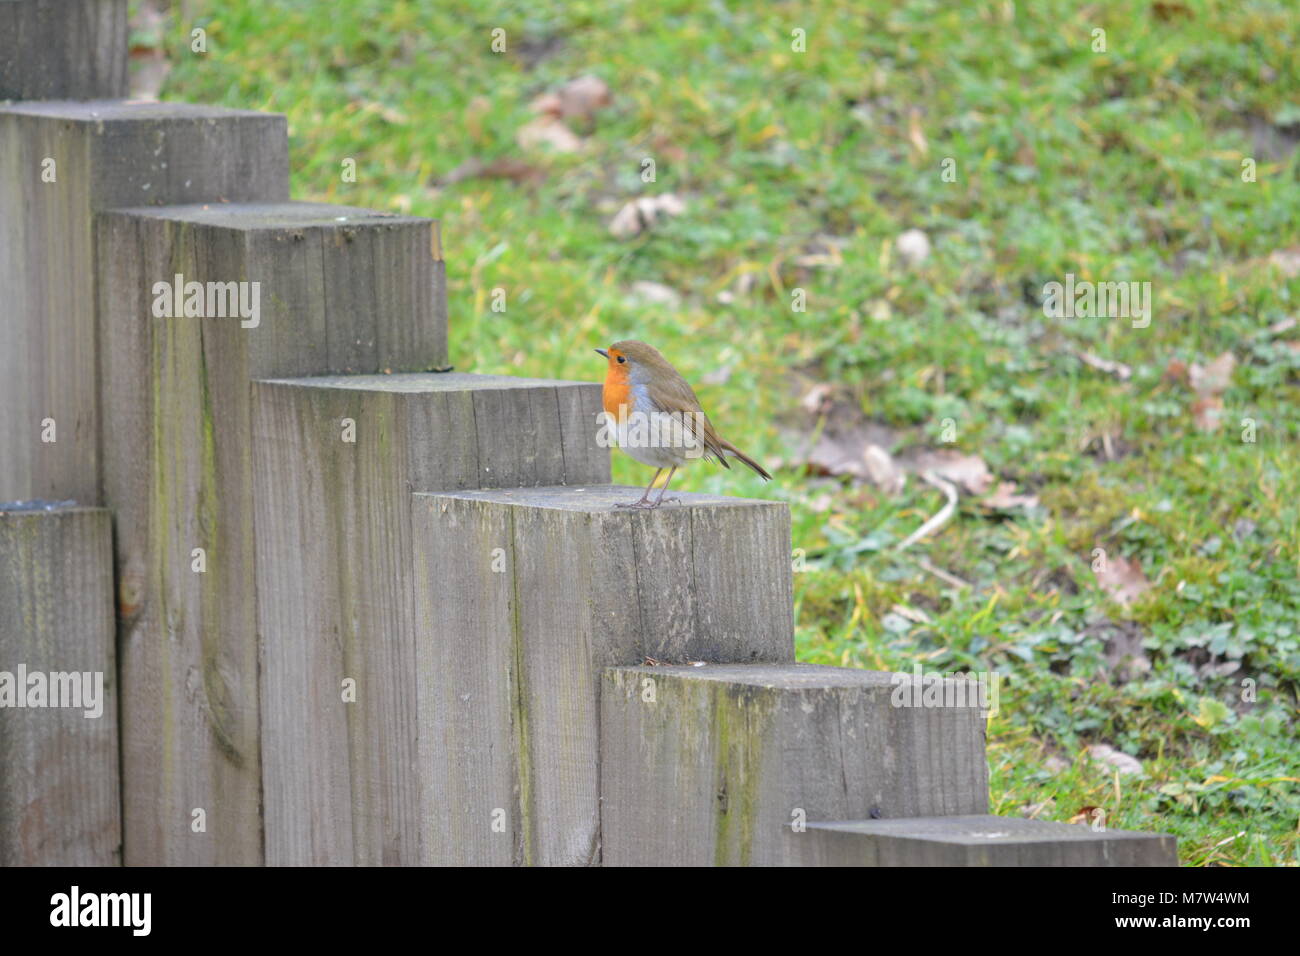 close up of robin red breast bird sitting on weathered wooden timber sleeper edging in garden with dead fallen leaves green lawn Herefordshire England Stock Photo